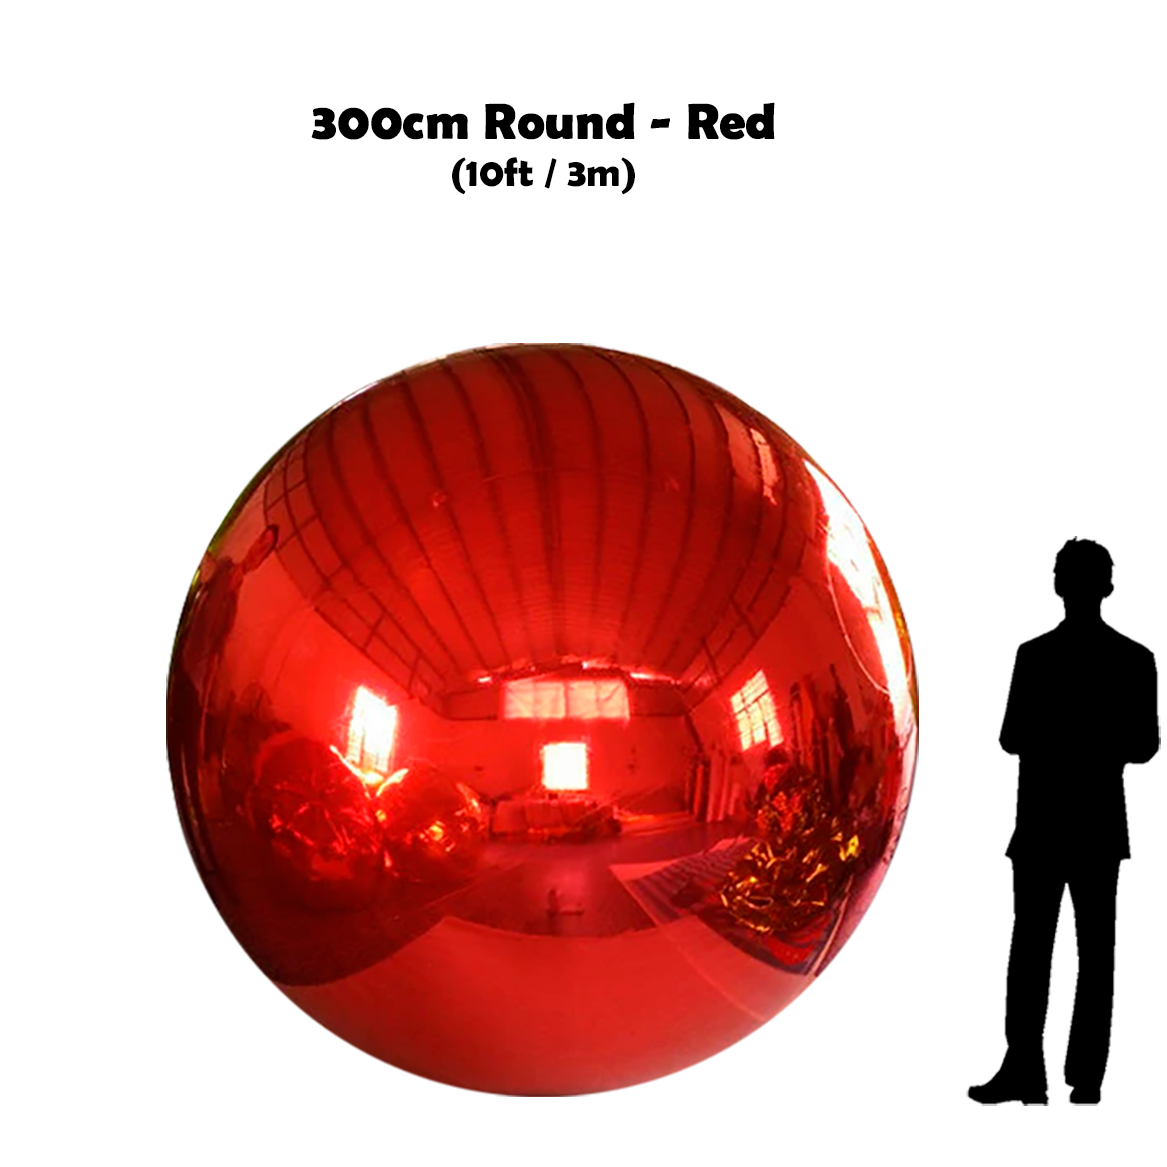 300cm Big red ball beside 5'10 guy silhouette 